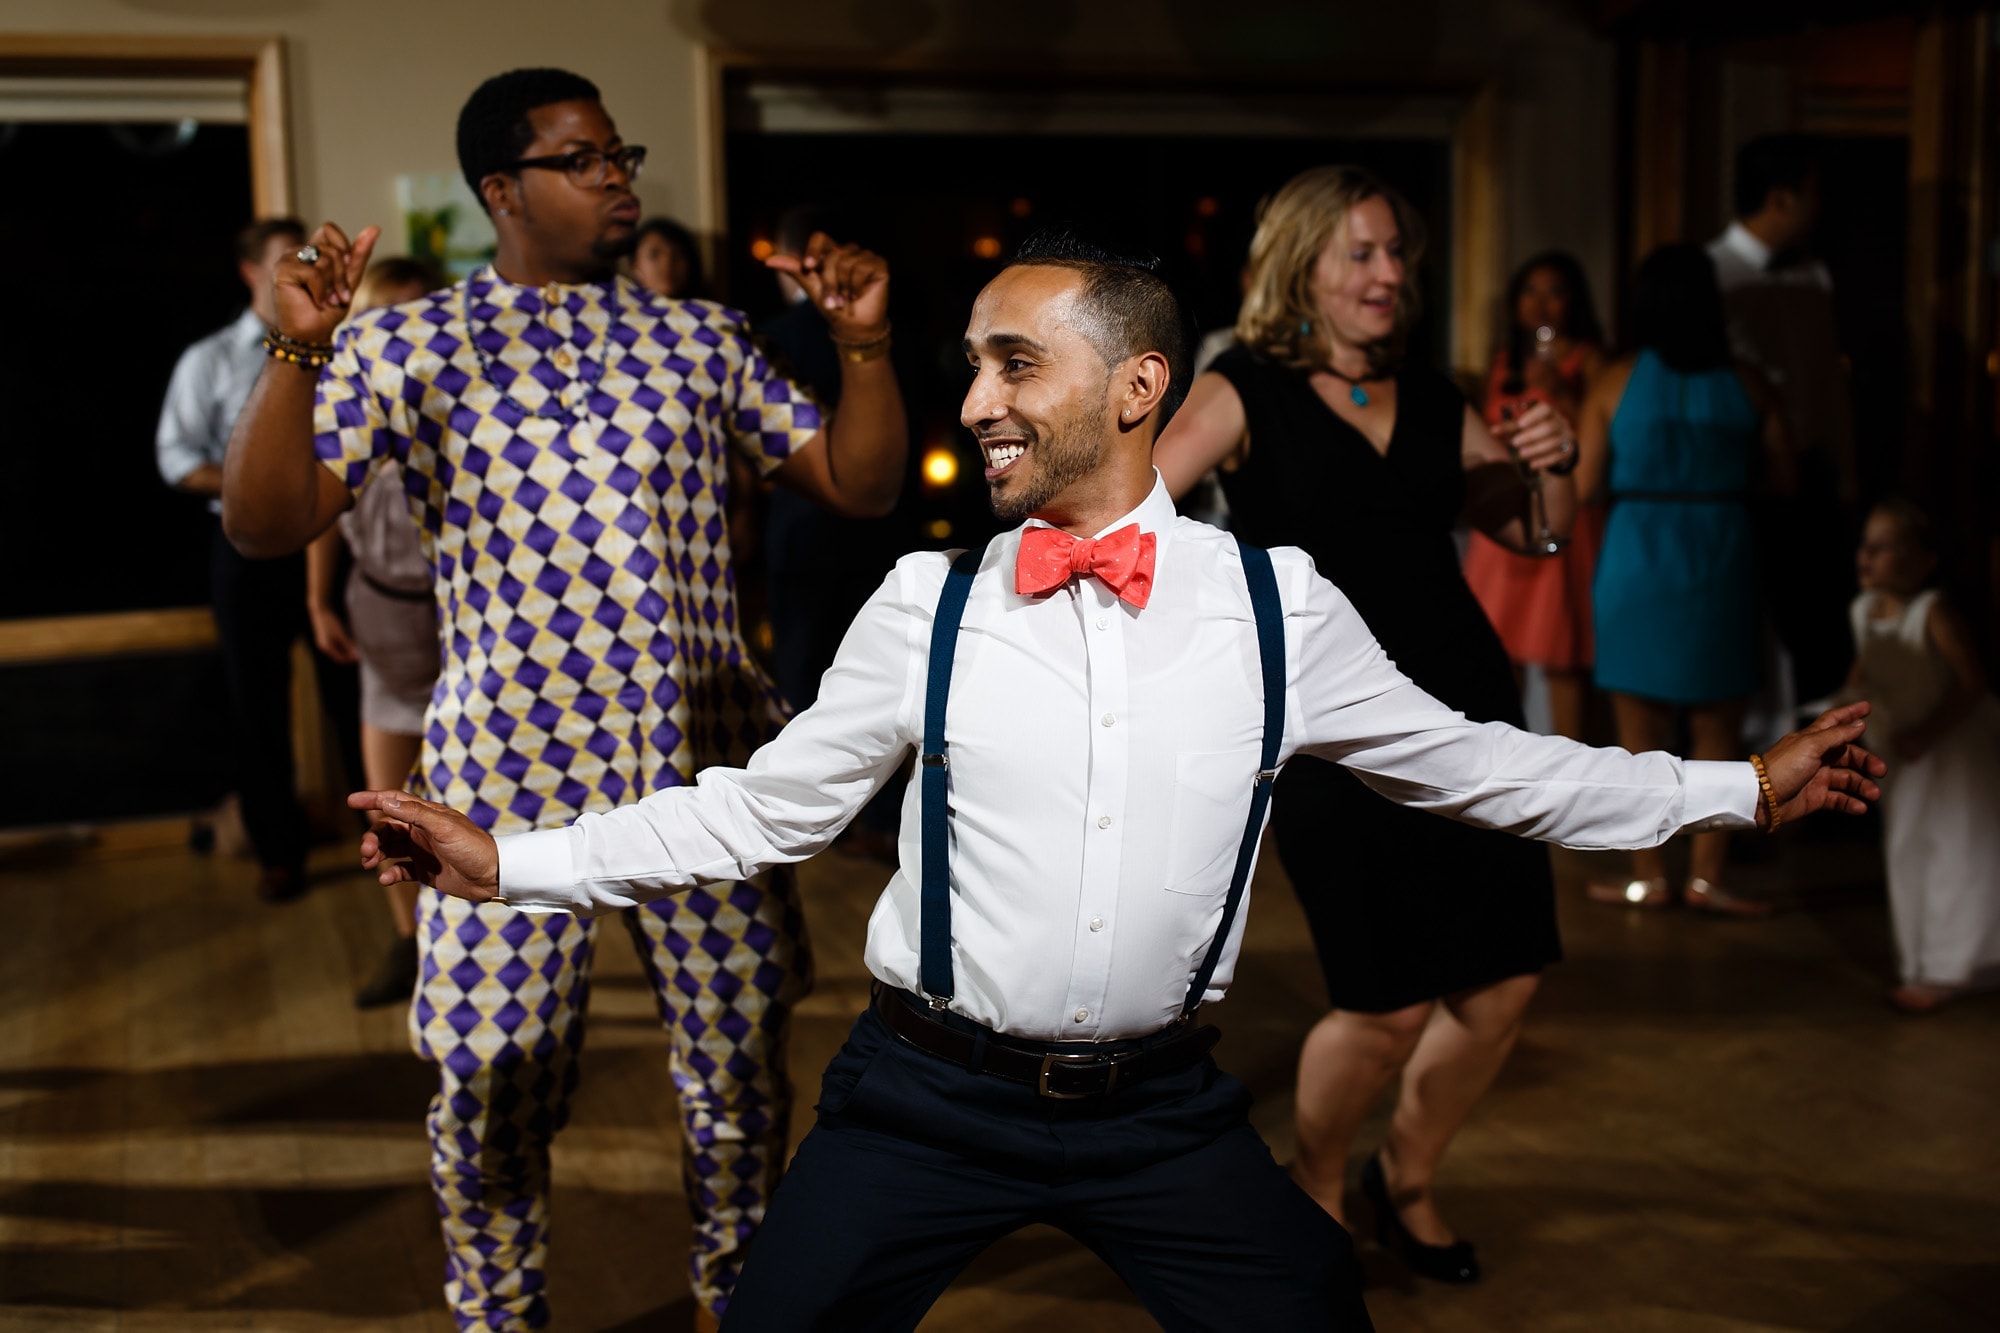 Guests dance at the wedding reception at Rembrandt Yard